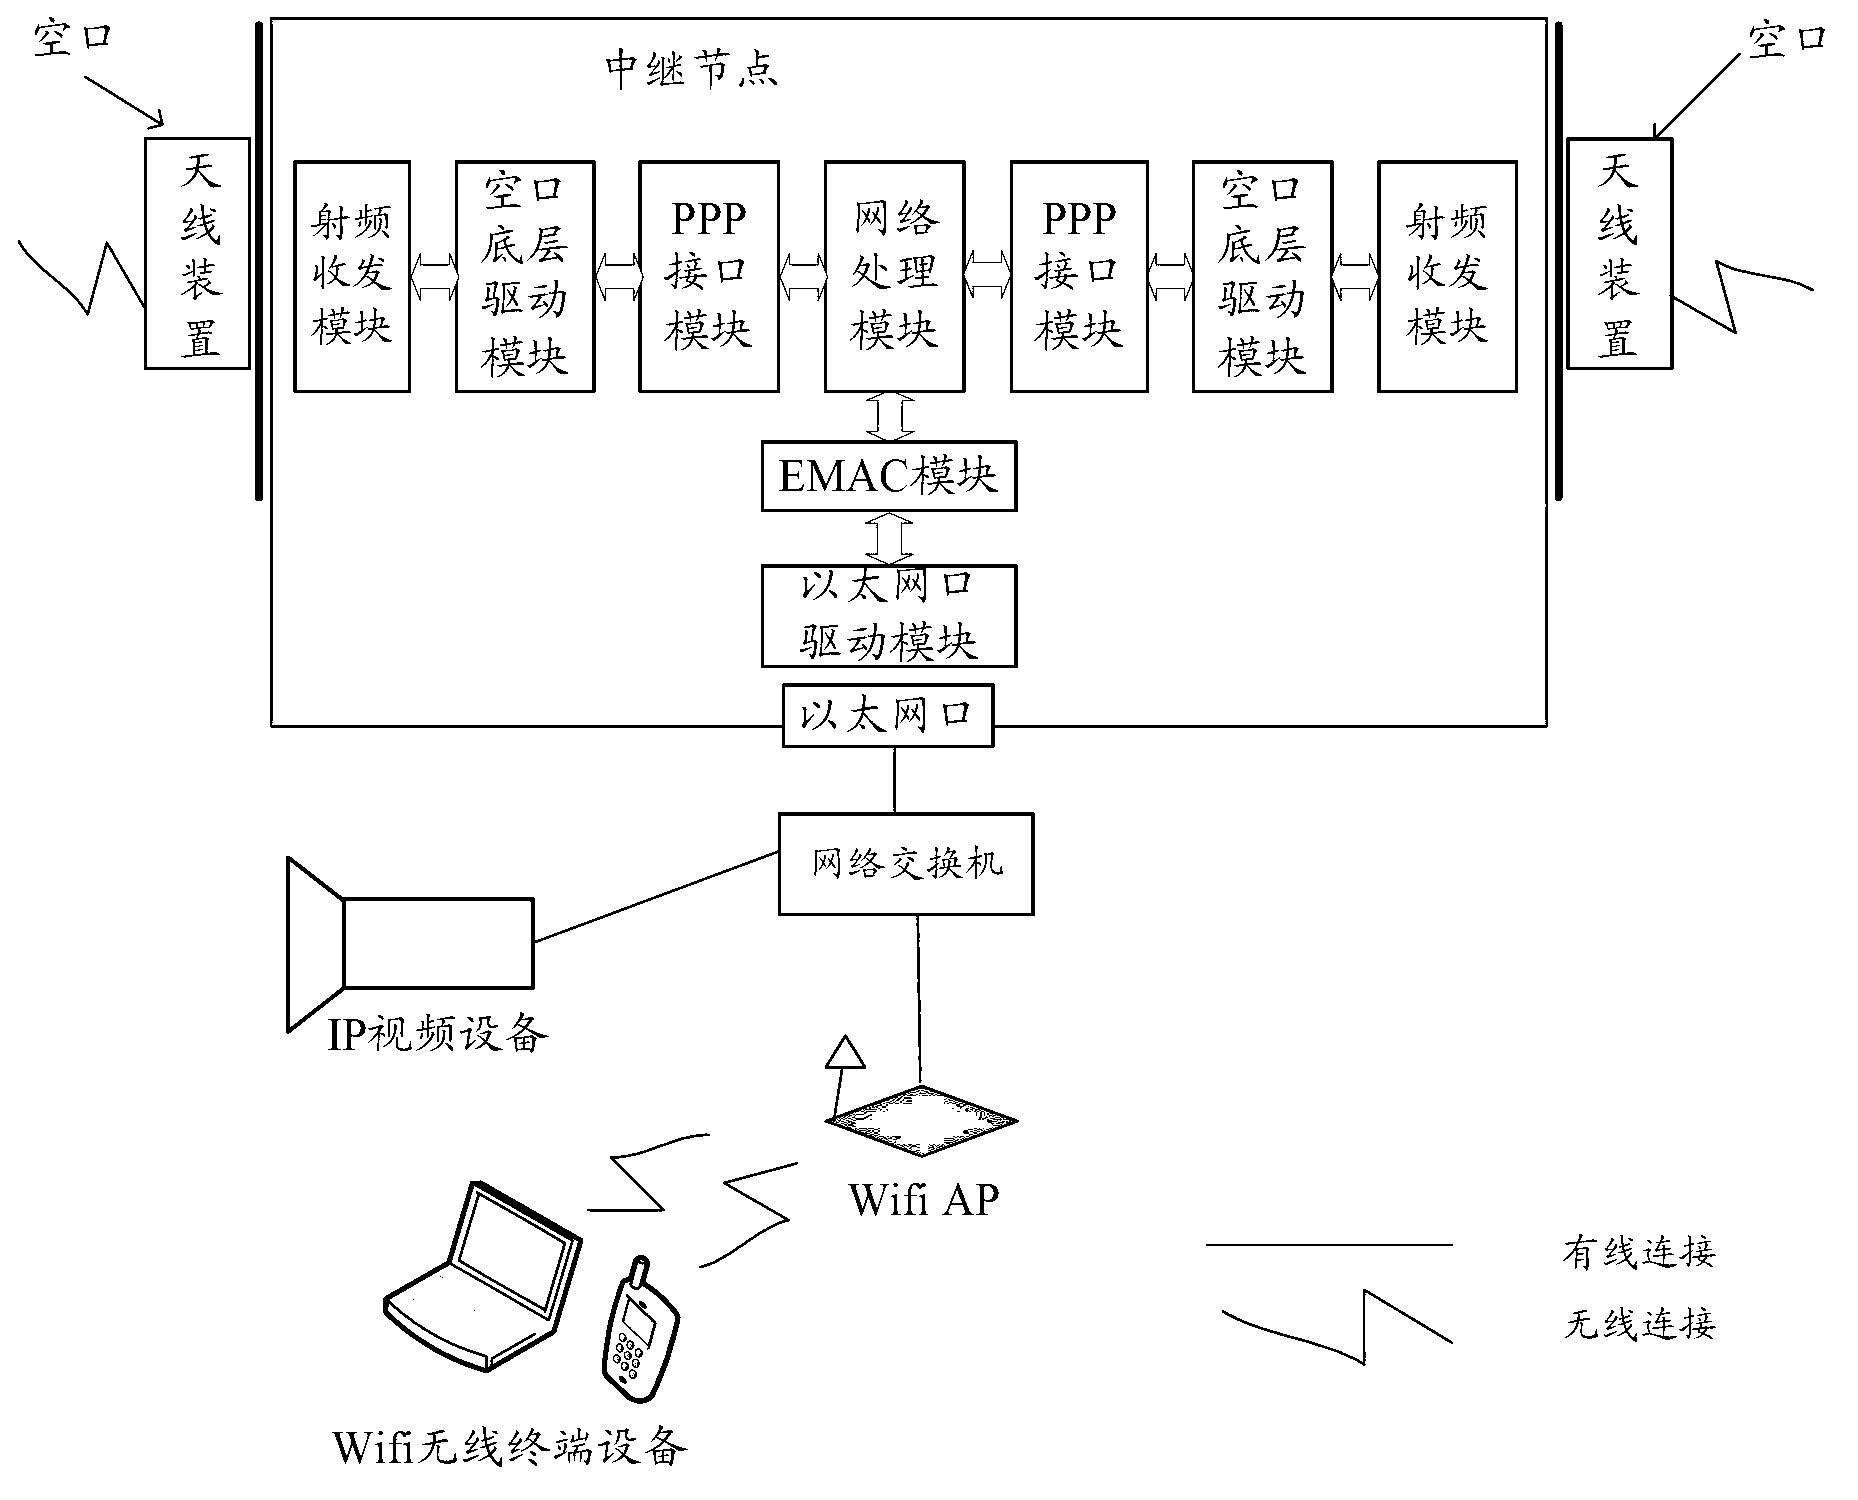 Multi-relay wireless communication system and method for realizing IP (Internet Protocol)-based air interface for same